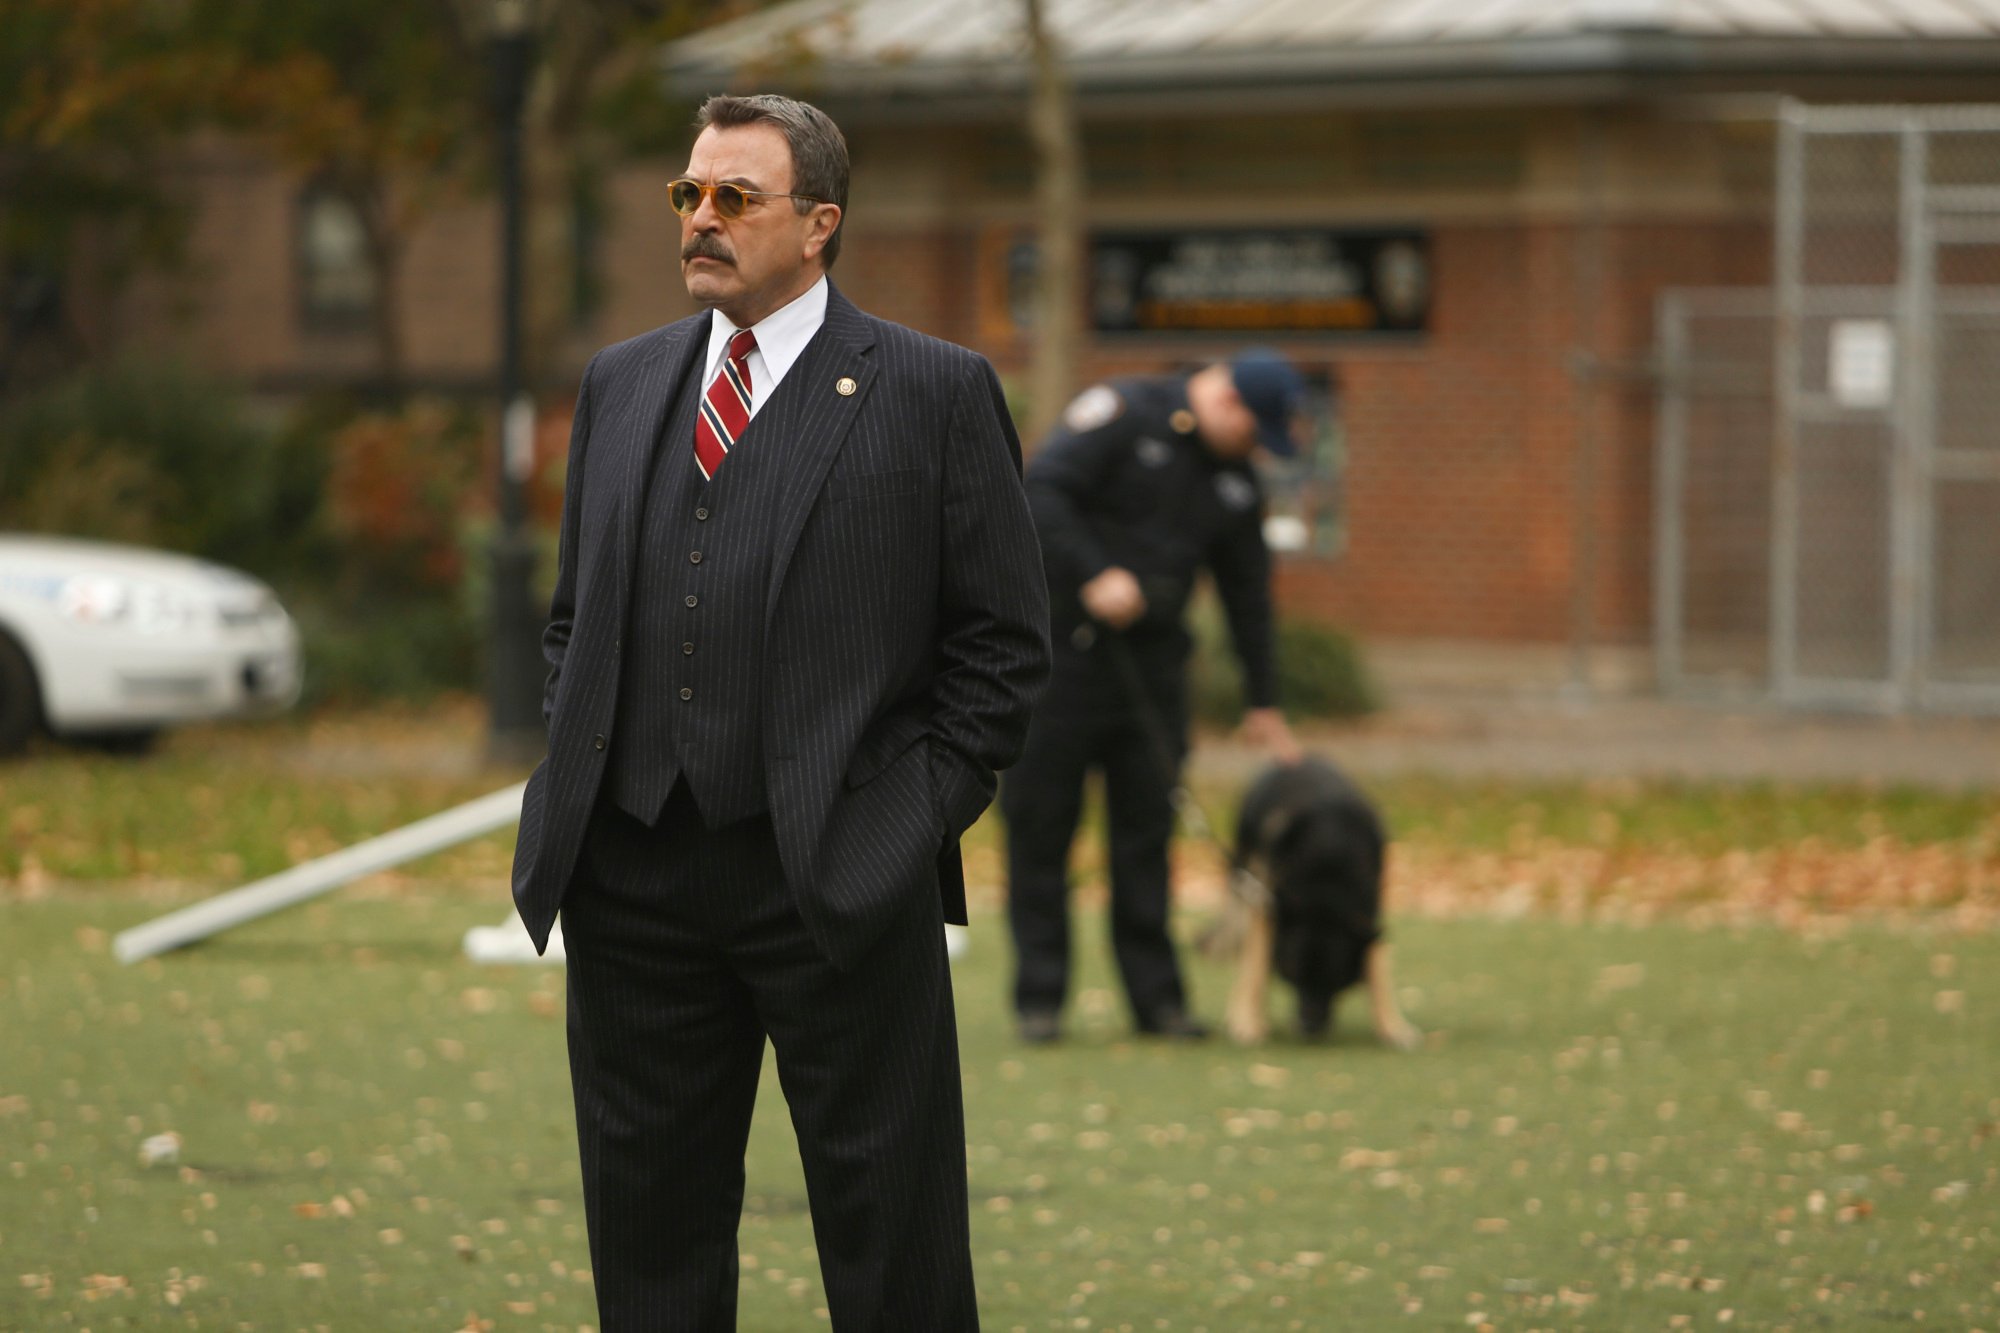 Tom Selleck as Frank Reagan. Will we see a new episode of 'Blue Bloods' this week? | Craig Blankenhorn/CBS via Getty Images